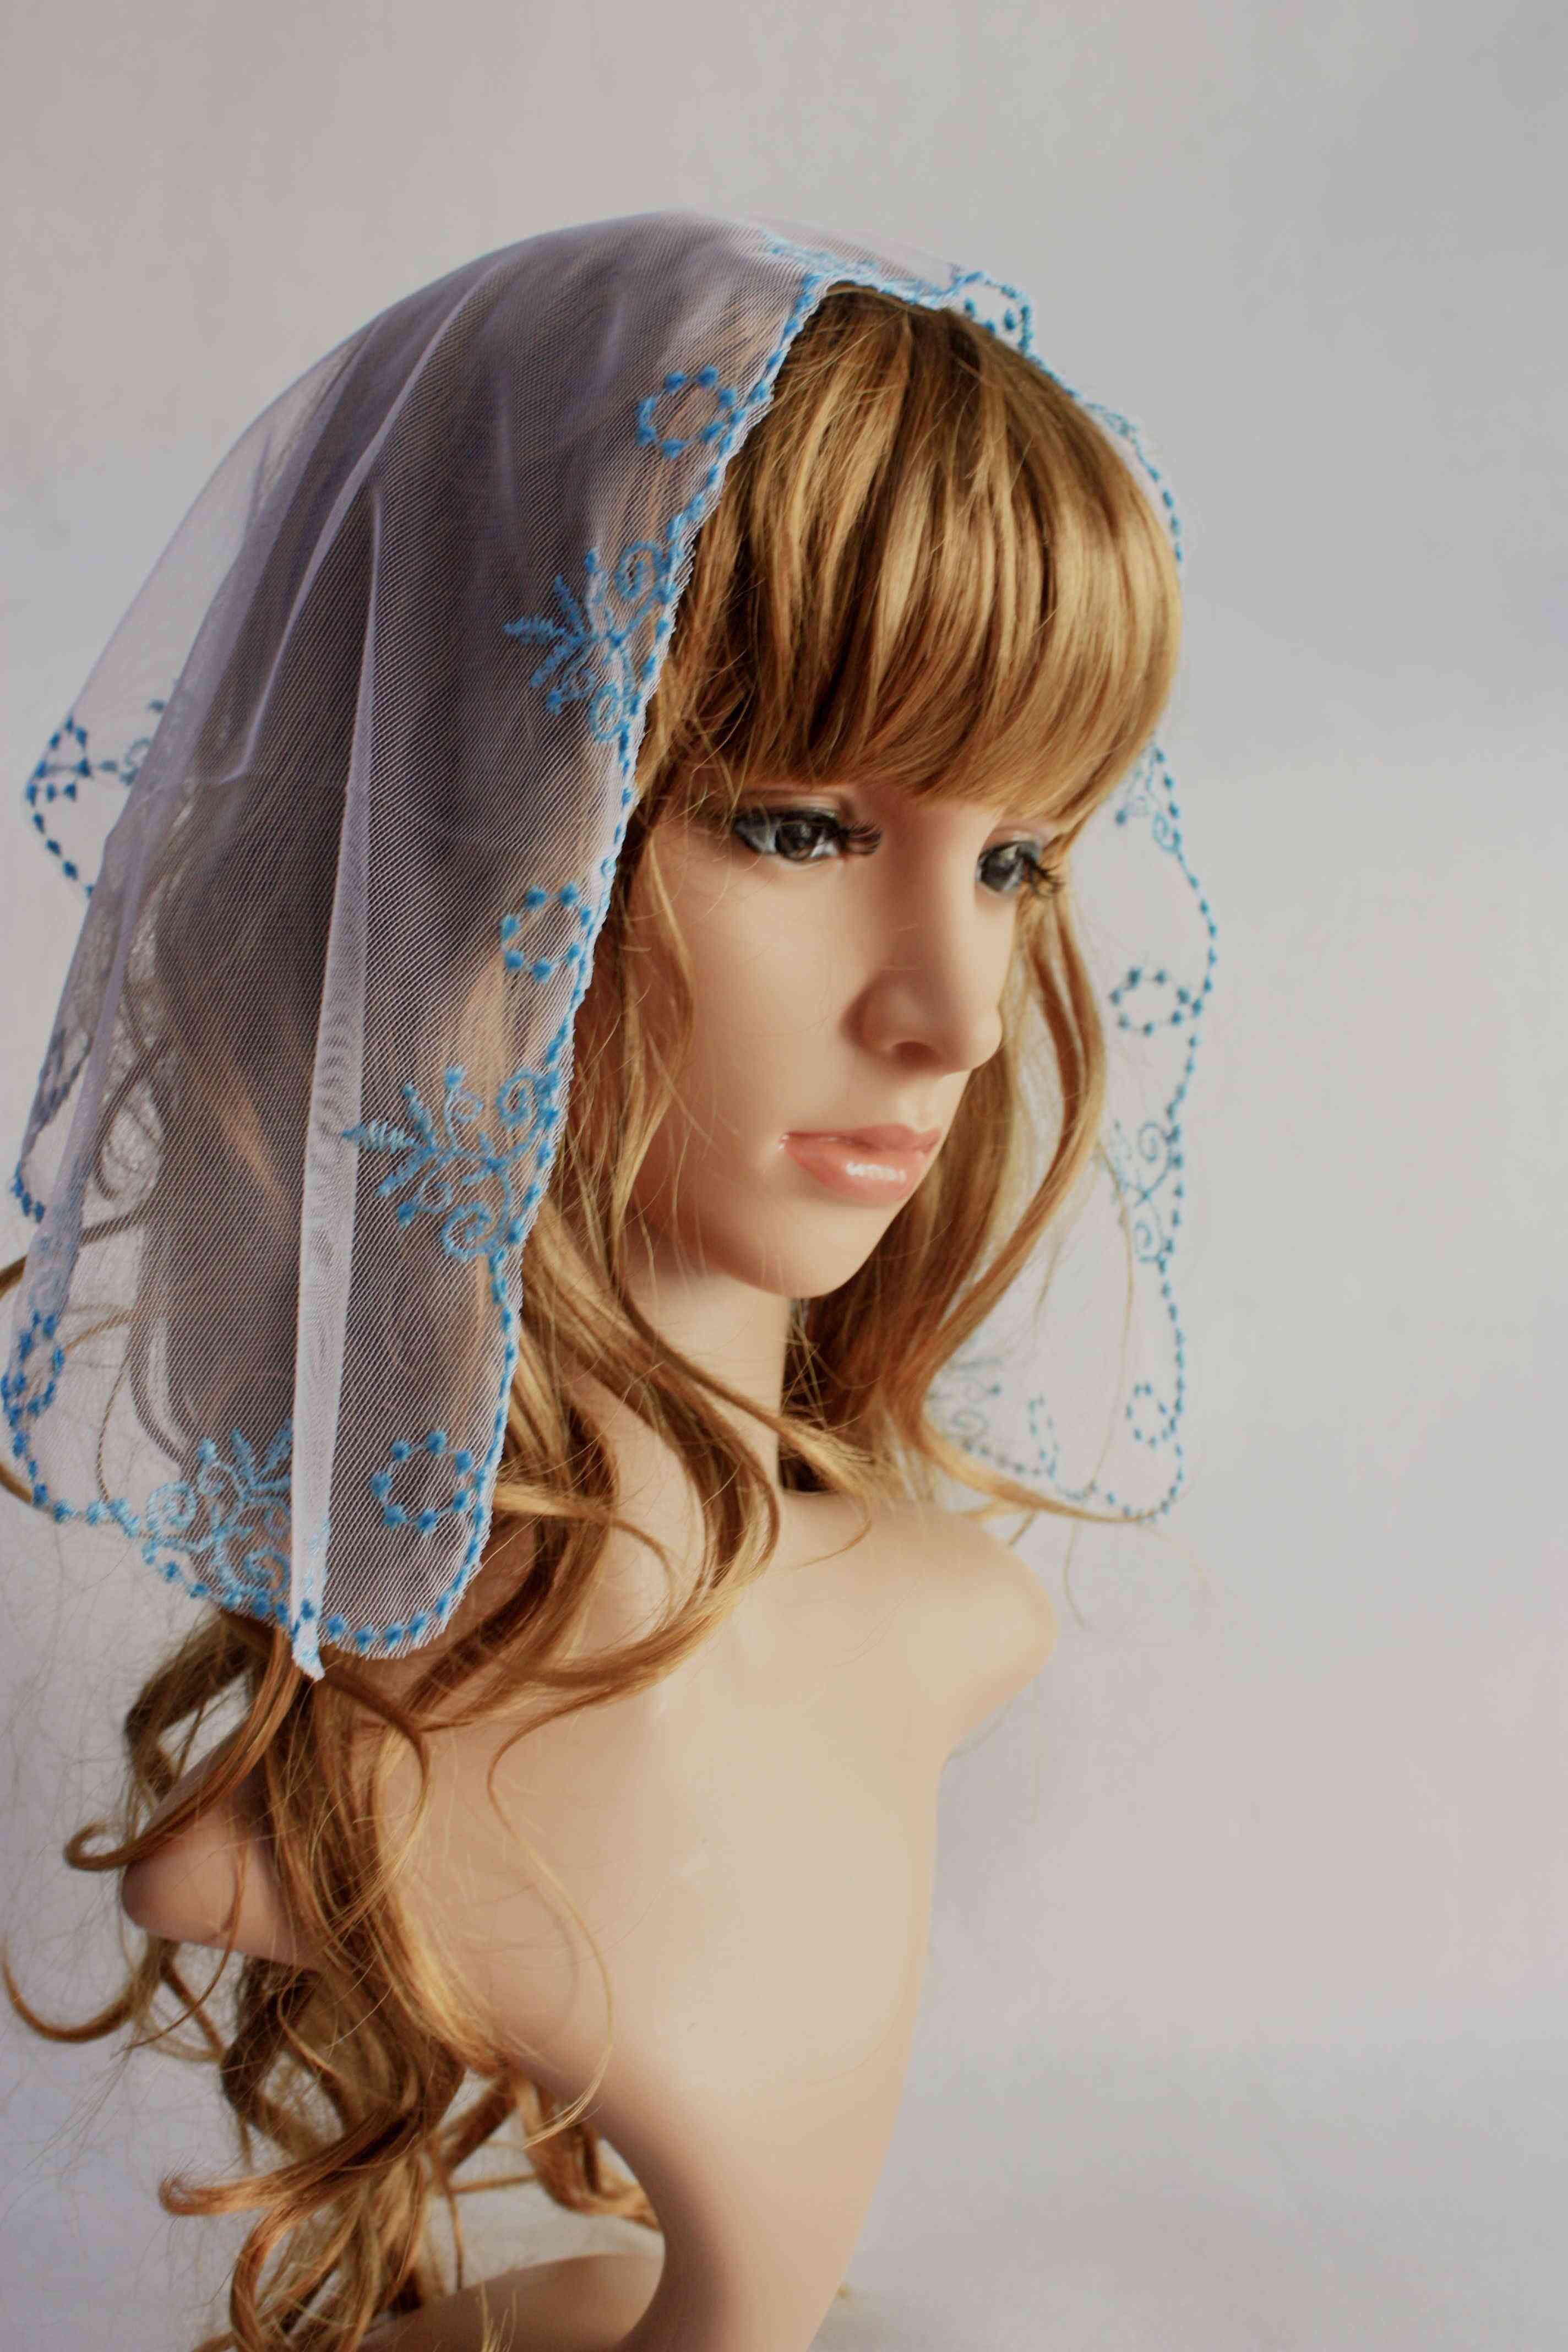 Embroidery Church Lady Head Covering Veil